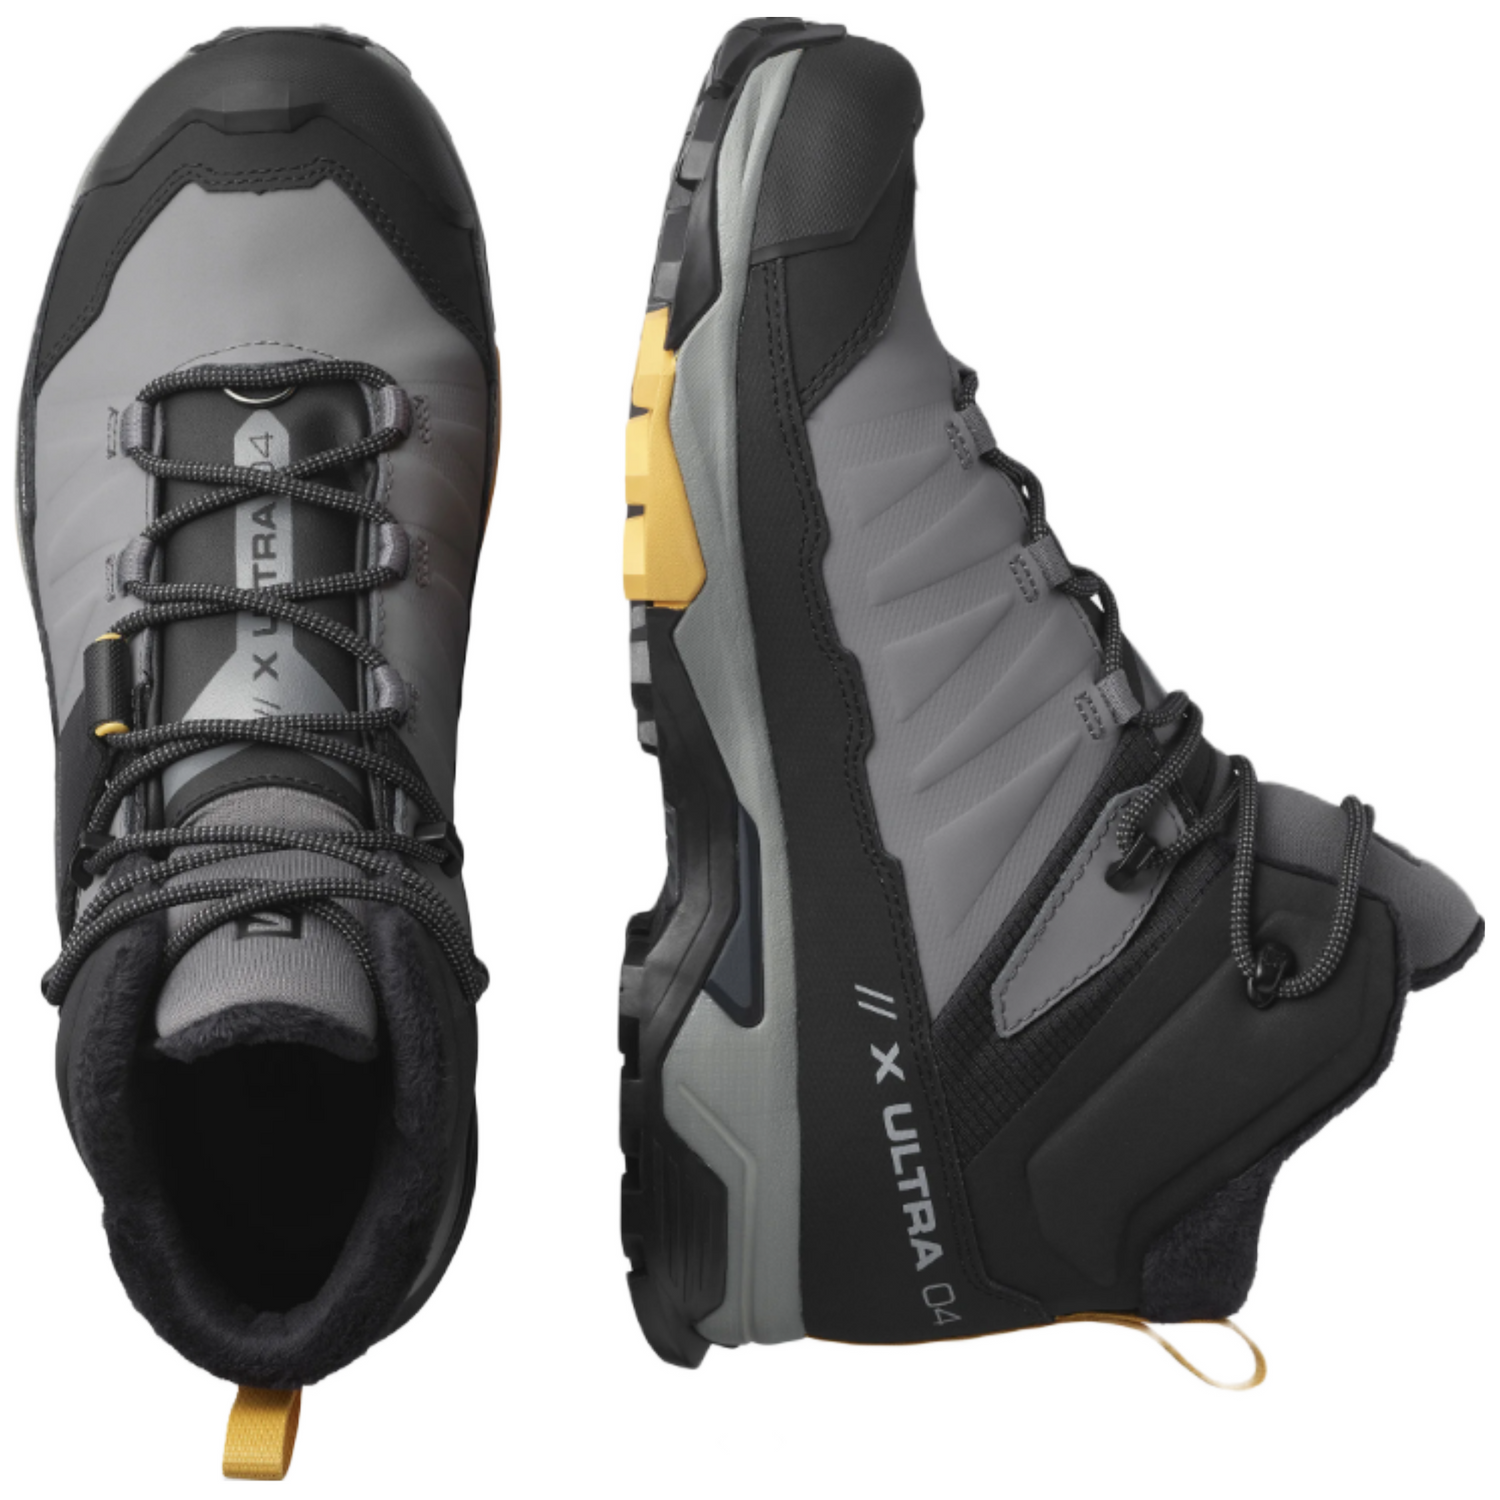 Men's Salomon X Ultra 4 Mid Winter Boots in black and grey